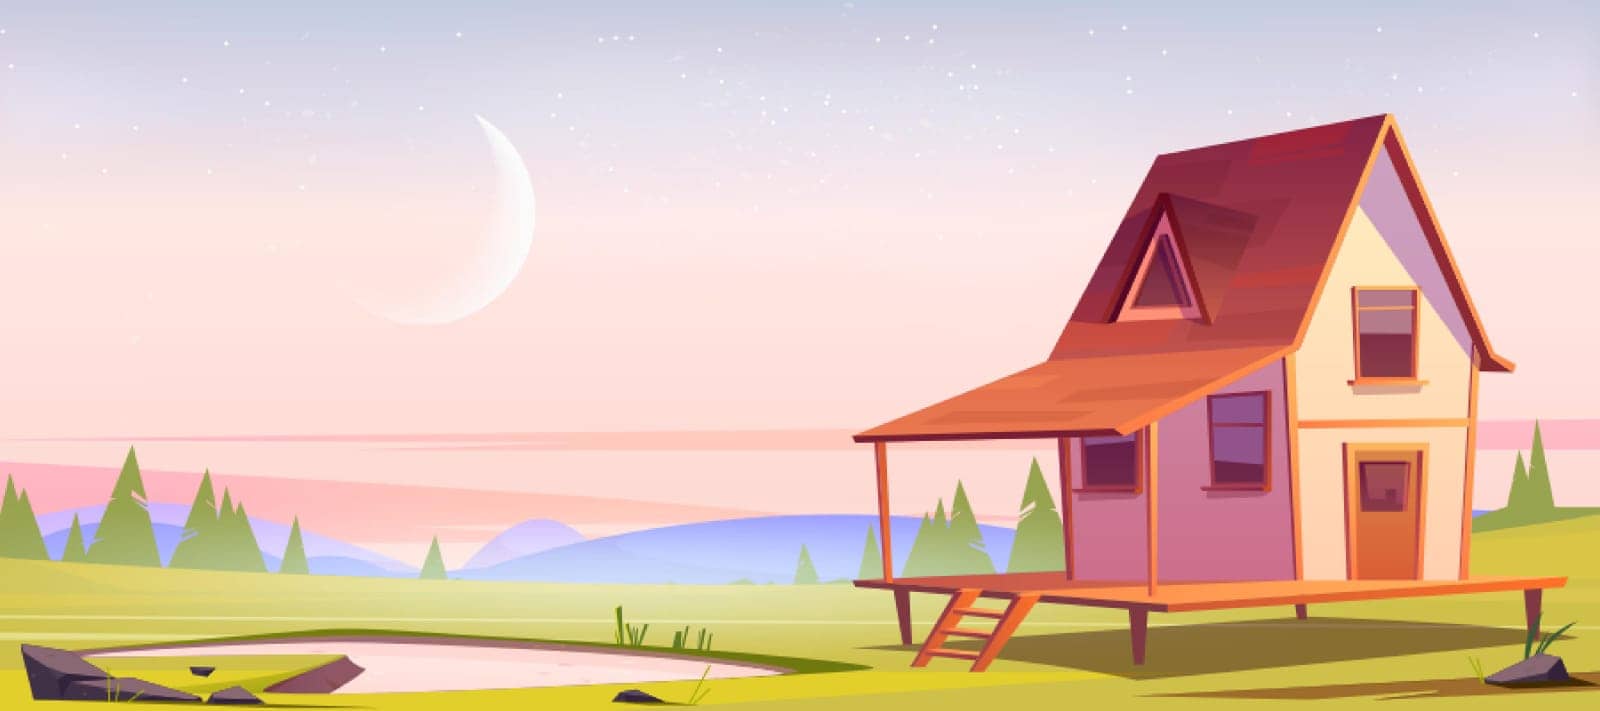 Village house on hill with pond and green grass at morning. Vector cartoon illustration of summer or spring landscape of countryside with small wooden cottage, lake, trees and waxing moon in sky